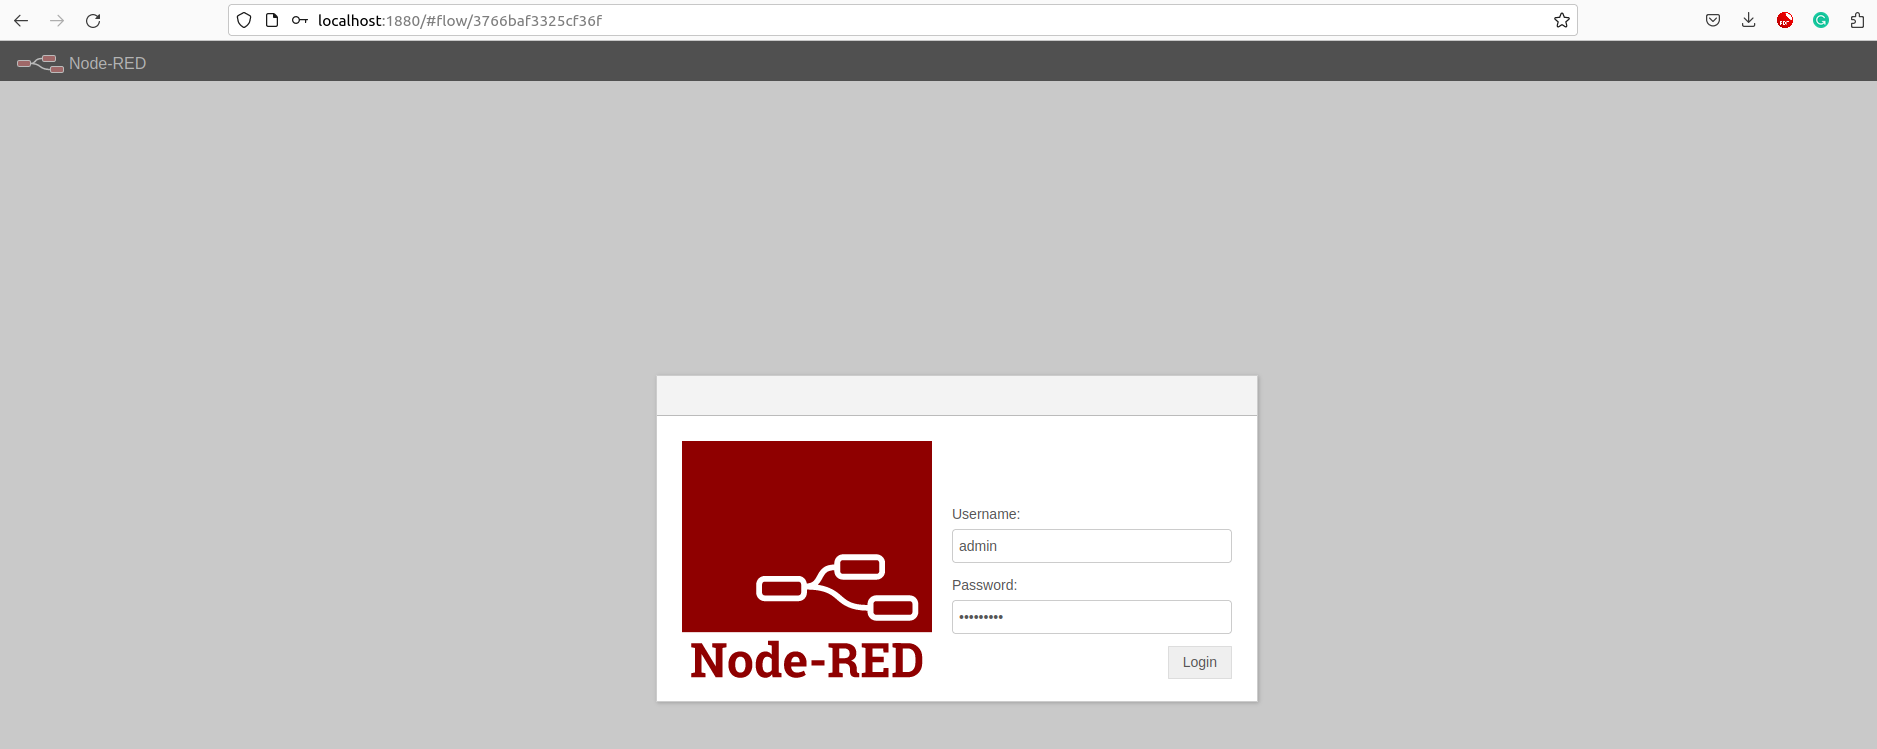 Node-RED view for credentials entry.